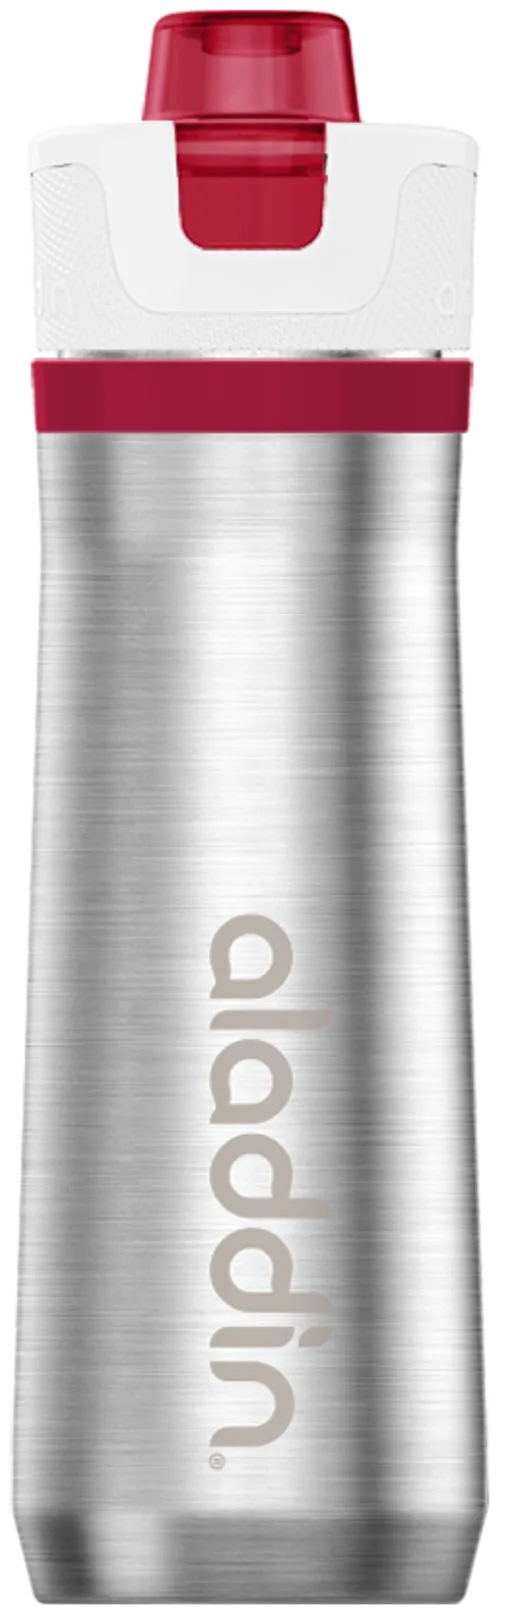 Active Hydration Thermavac™ Stainless Steel Water Bottle